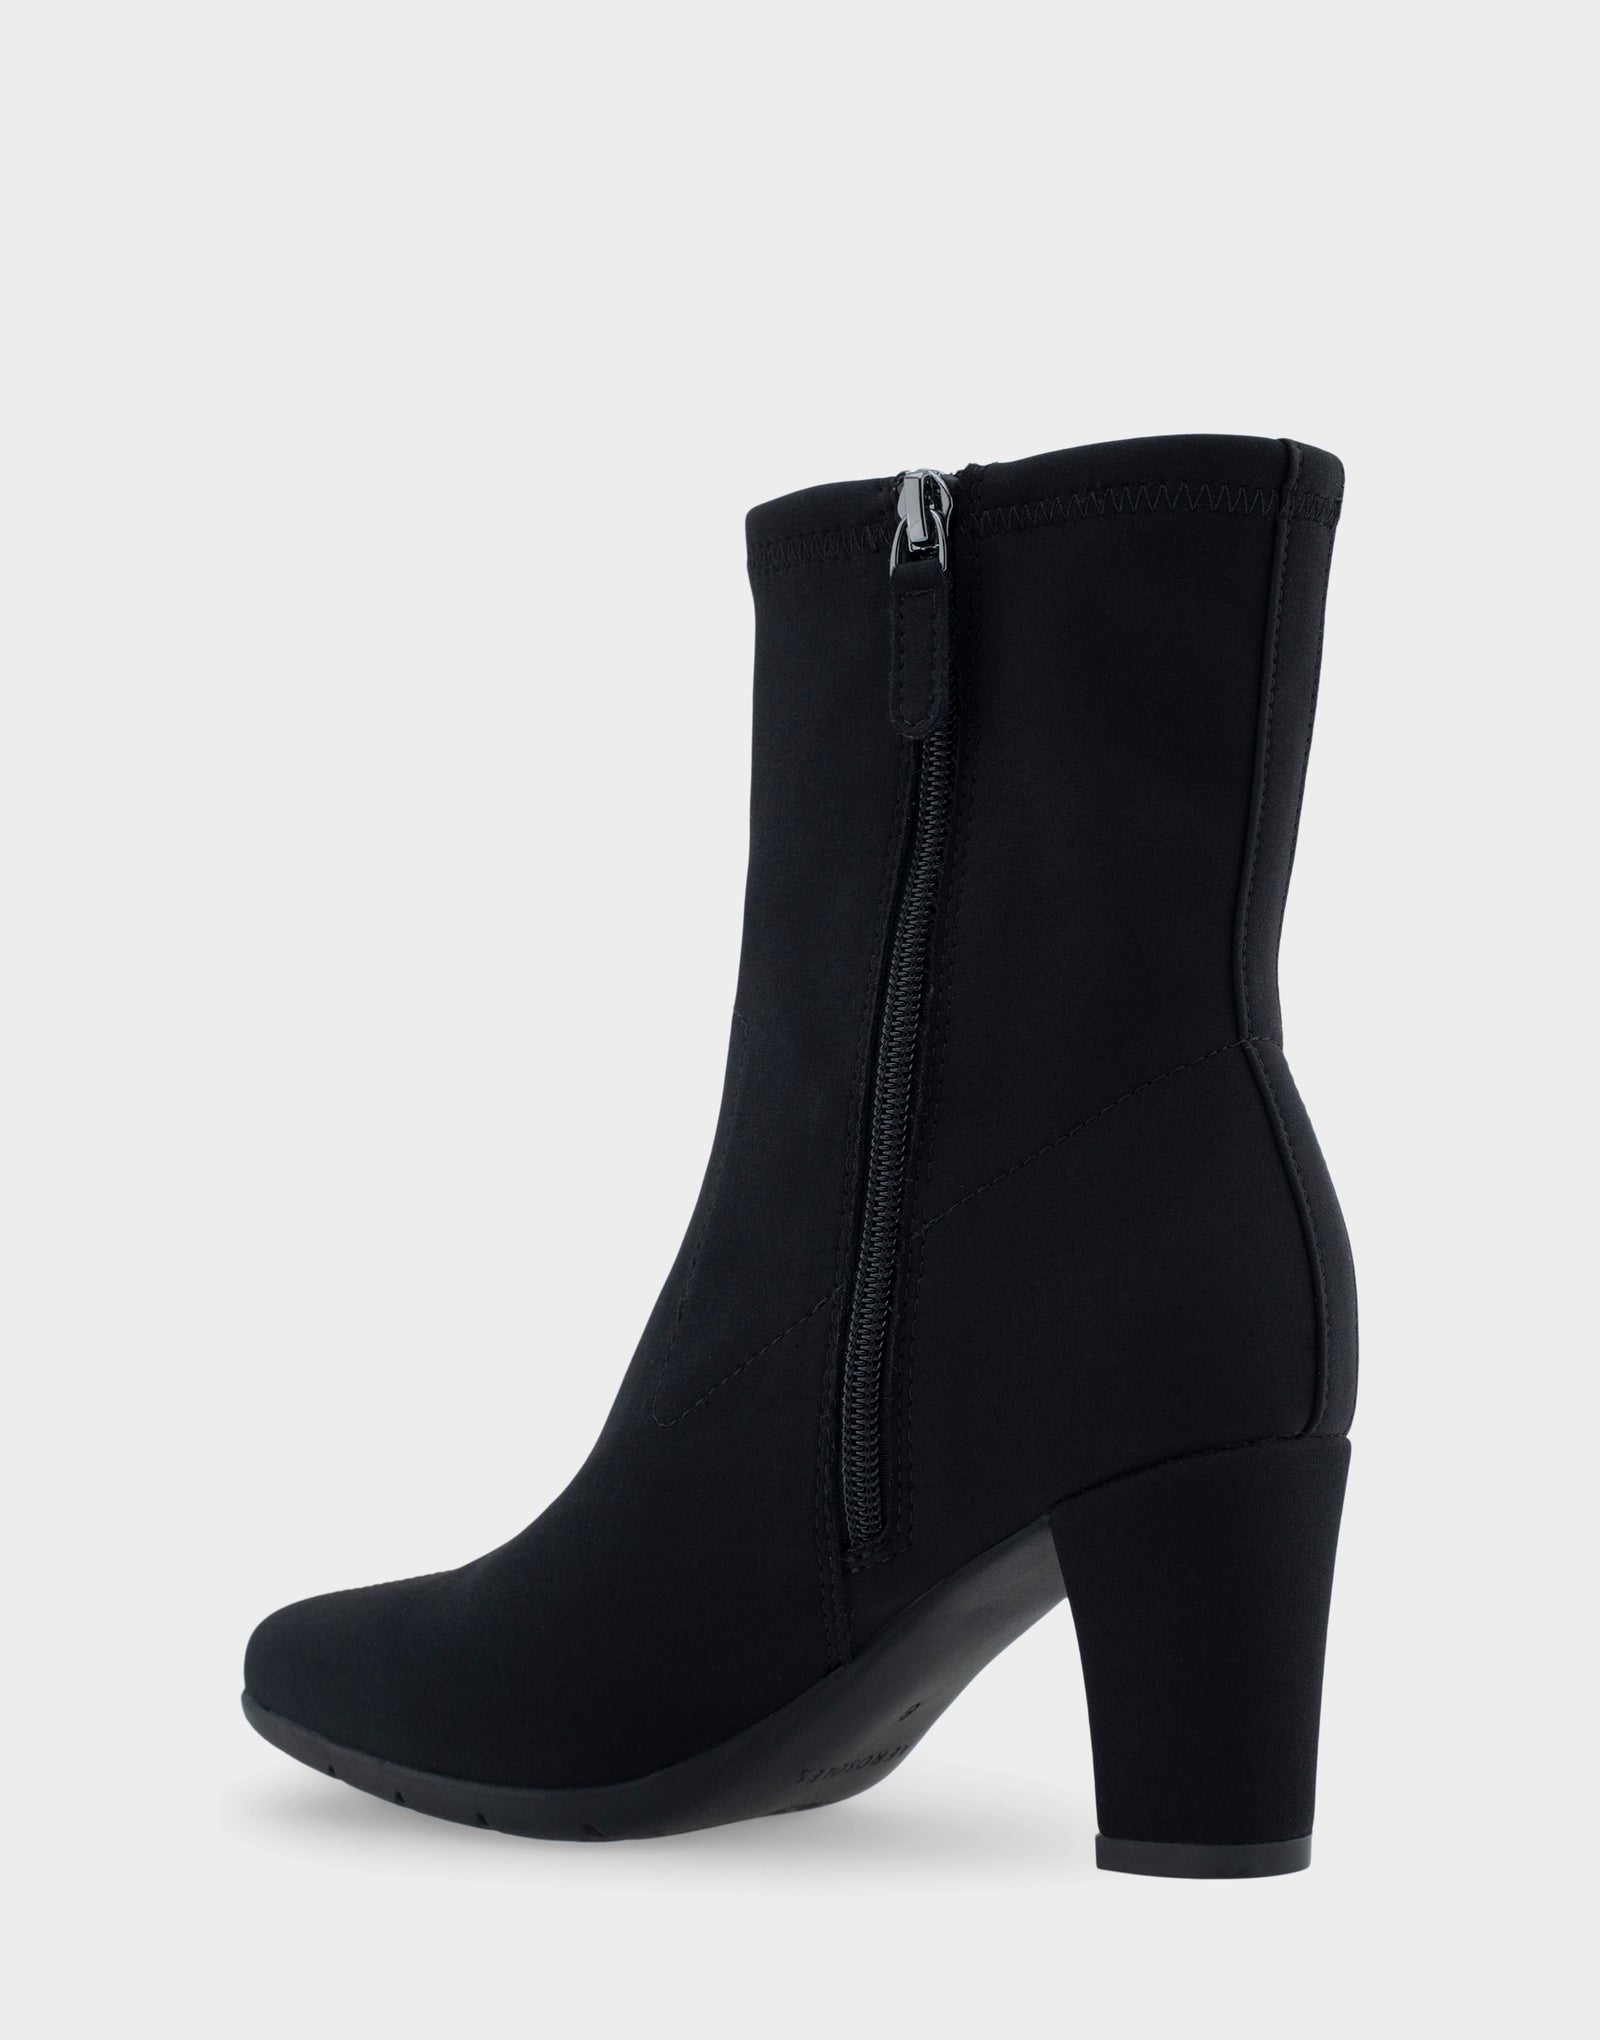 Women's Heeled Ankle Boot in Black